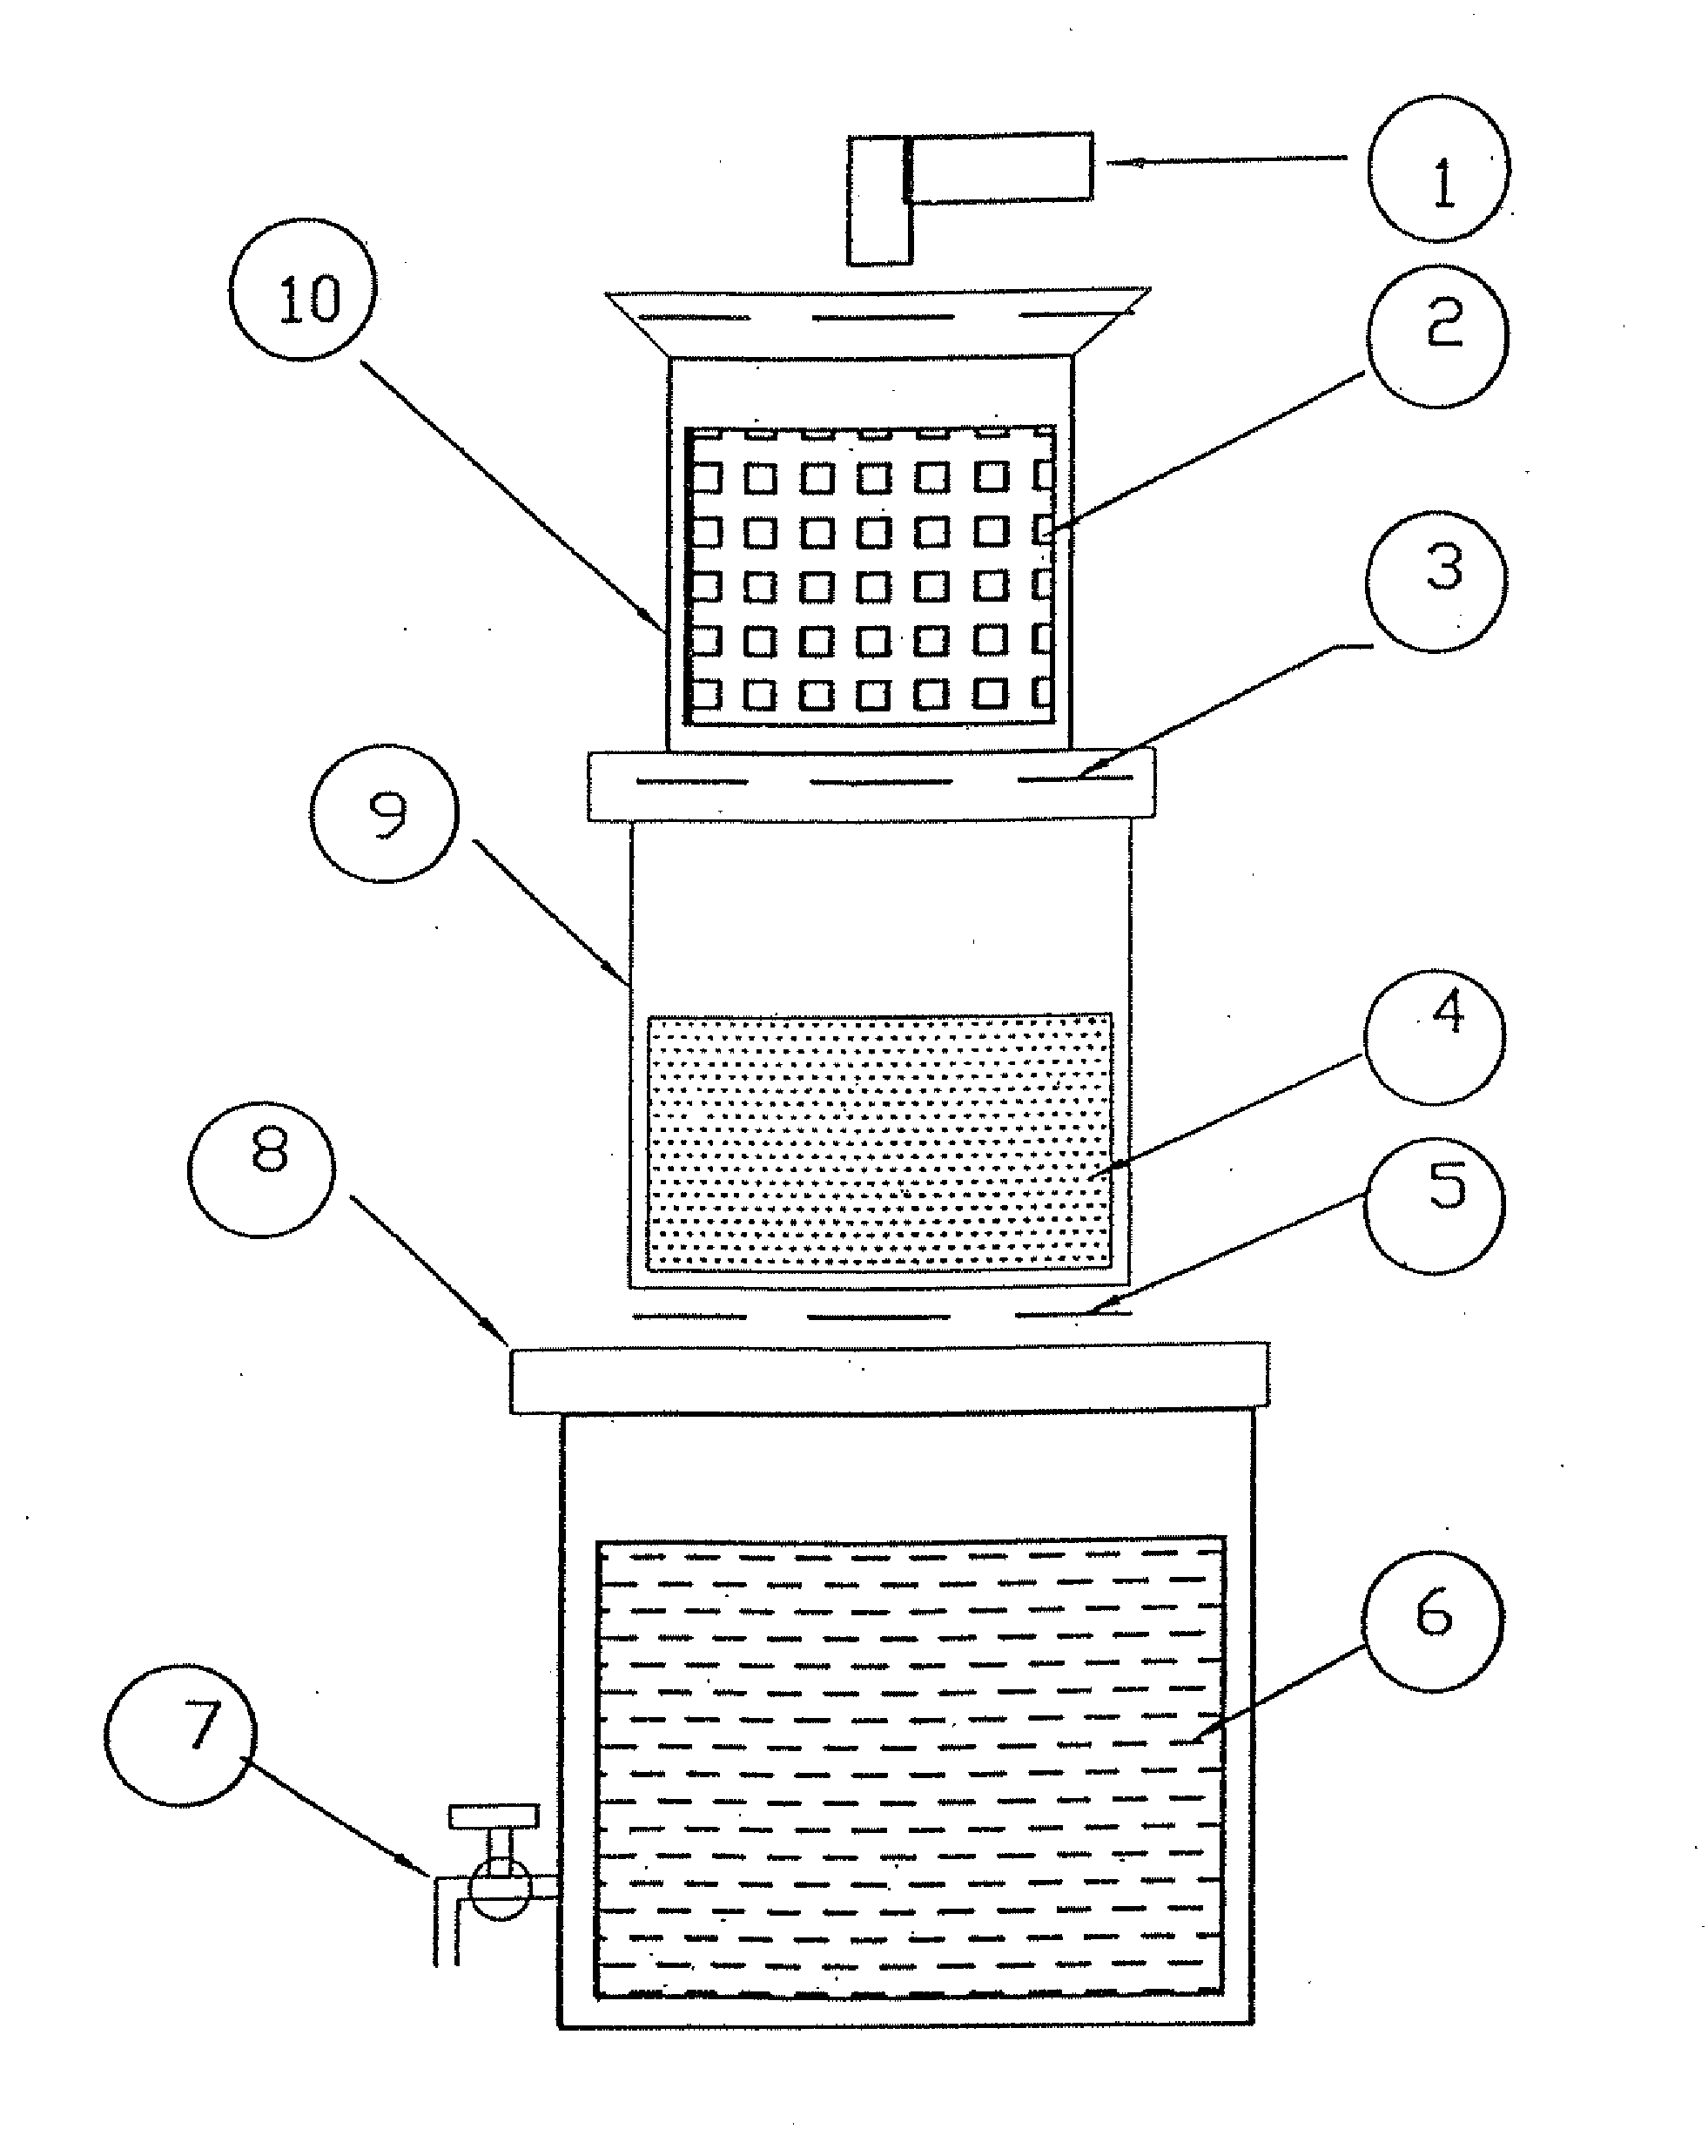 Filtering Device for the Removal of Arsenic from Water